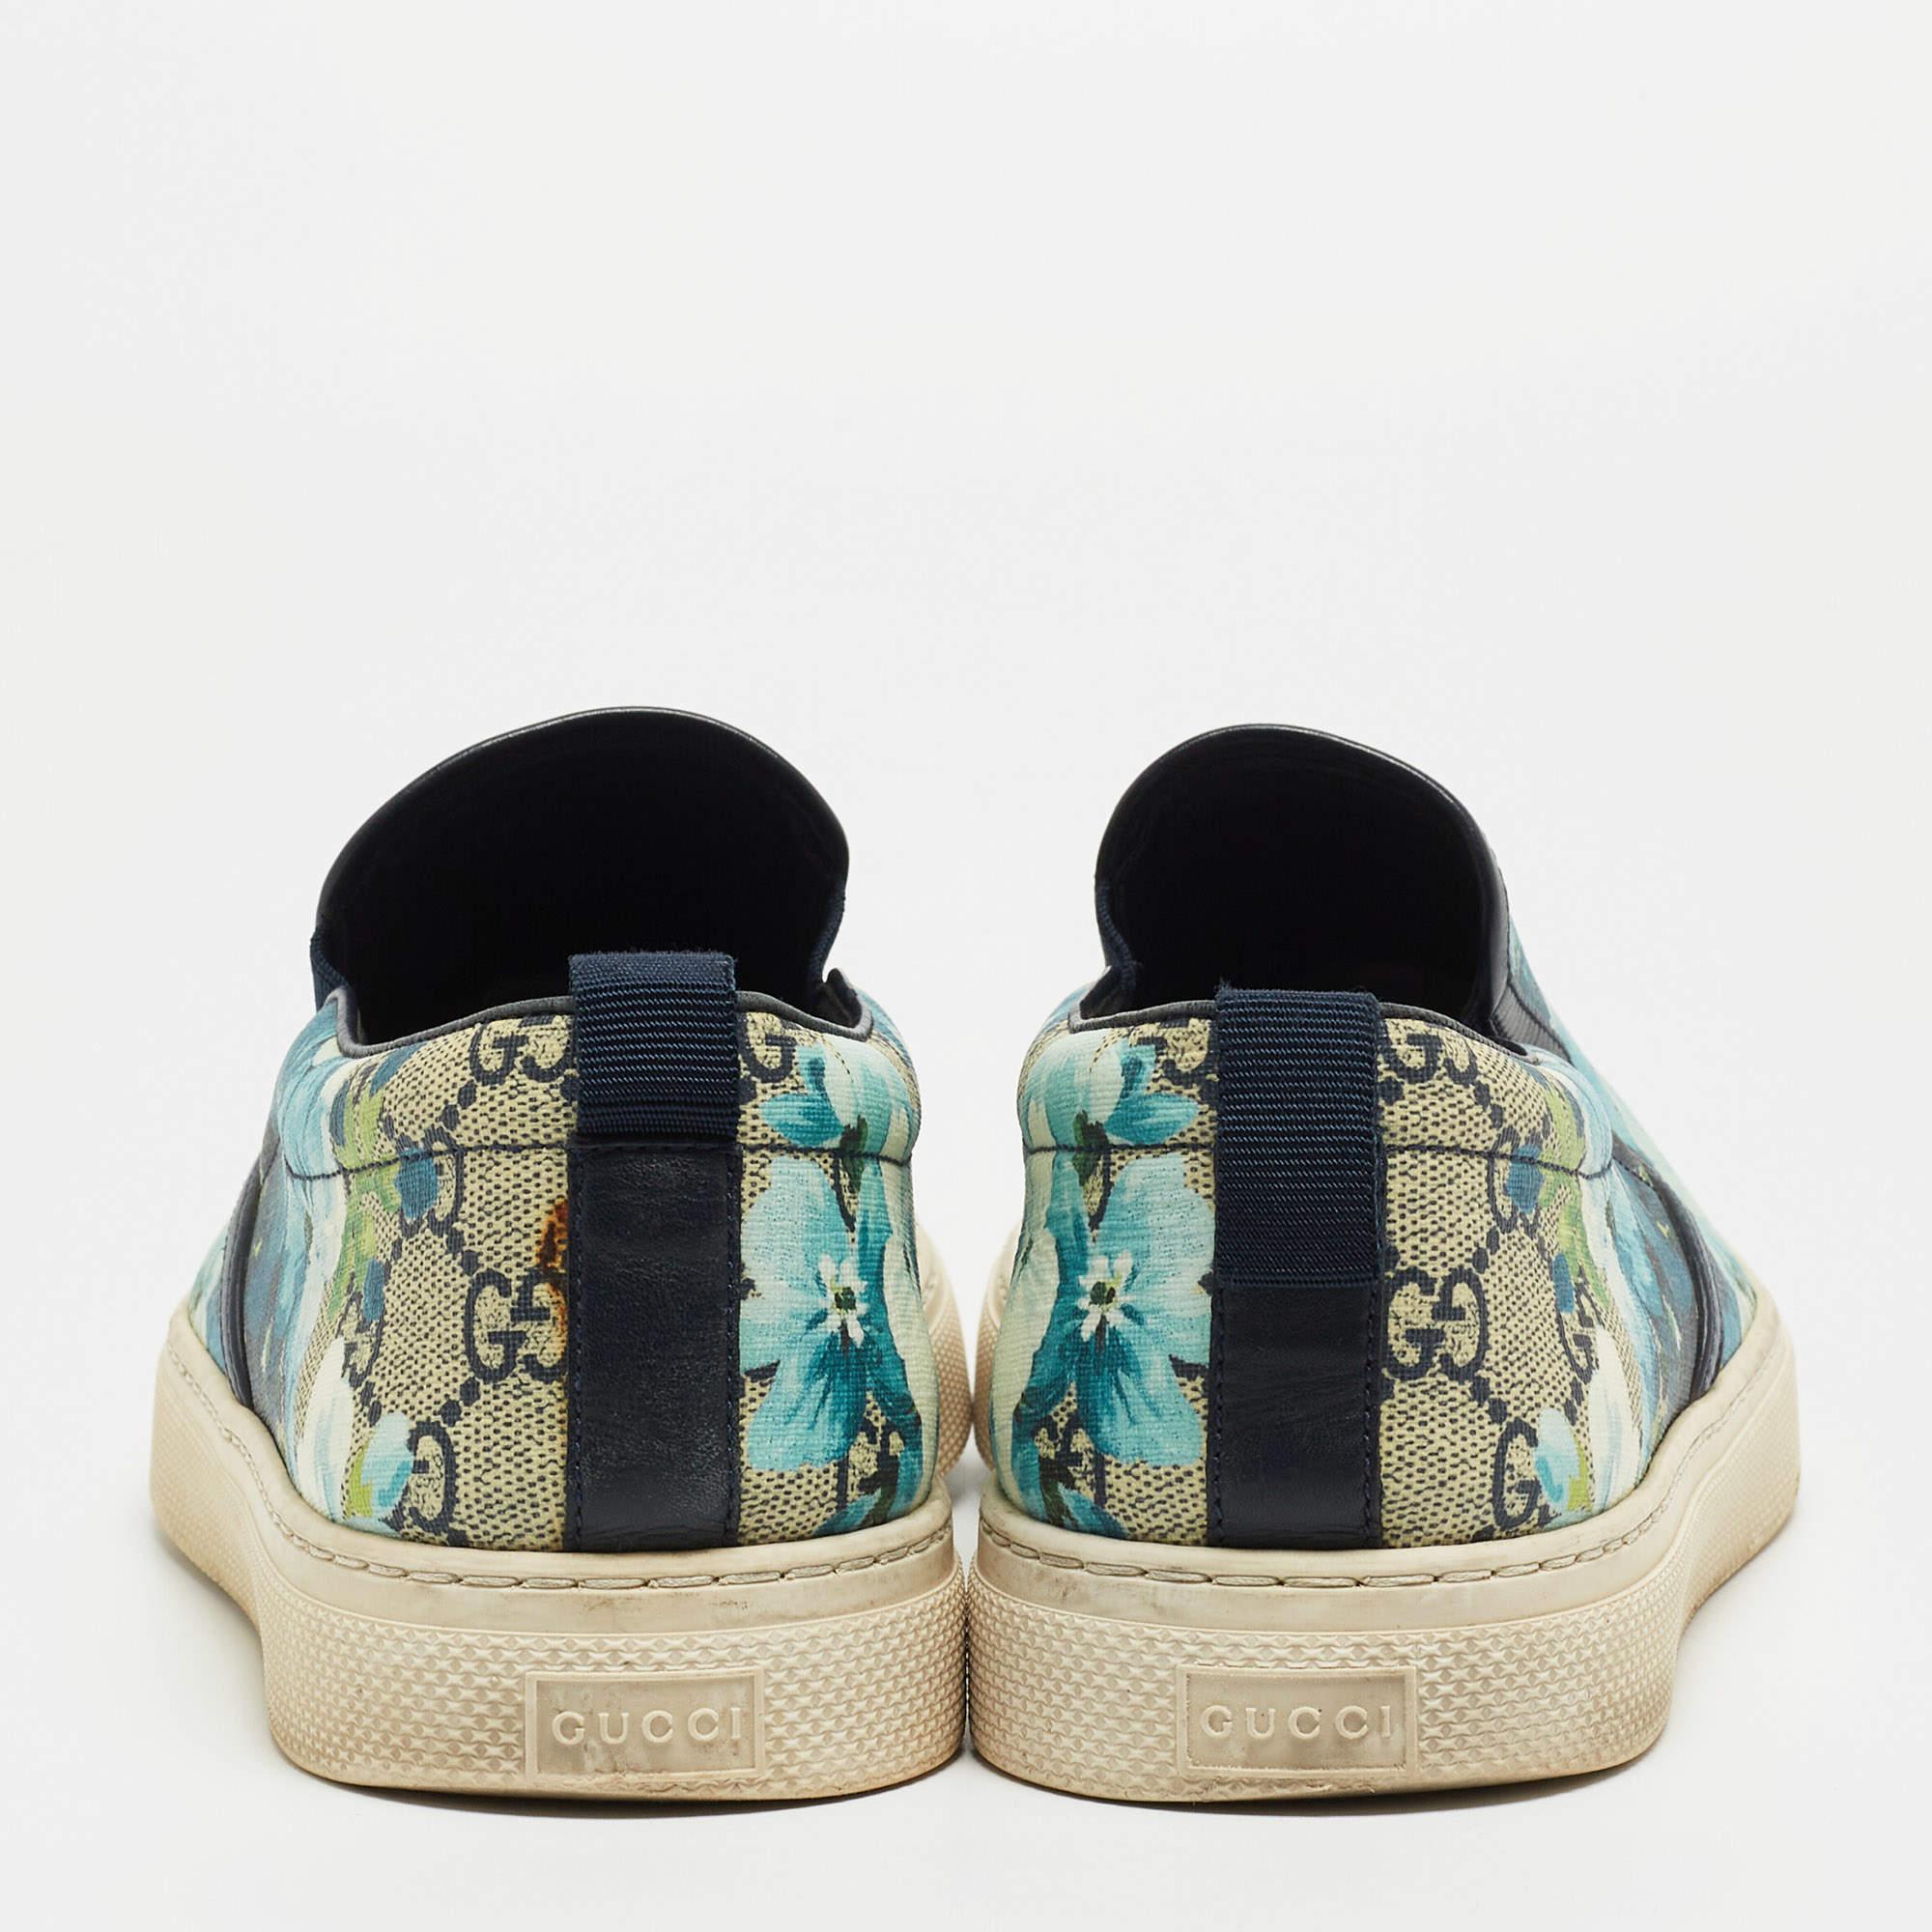 Gucci Multicolor GG Supreme Blooms Print Coated Canvas Sneakers Size 43.5 2